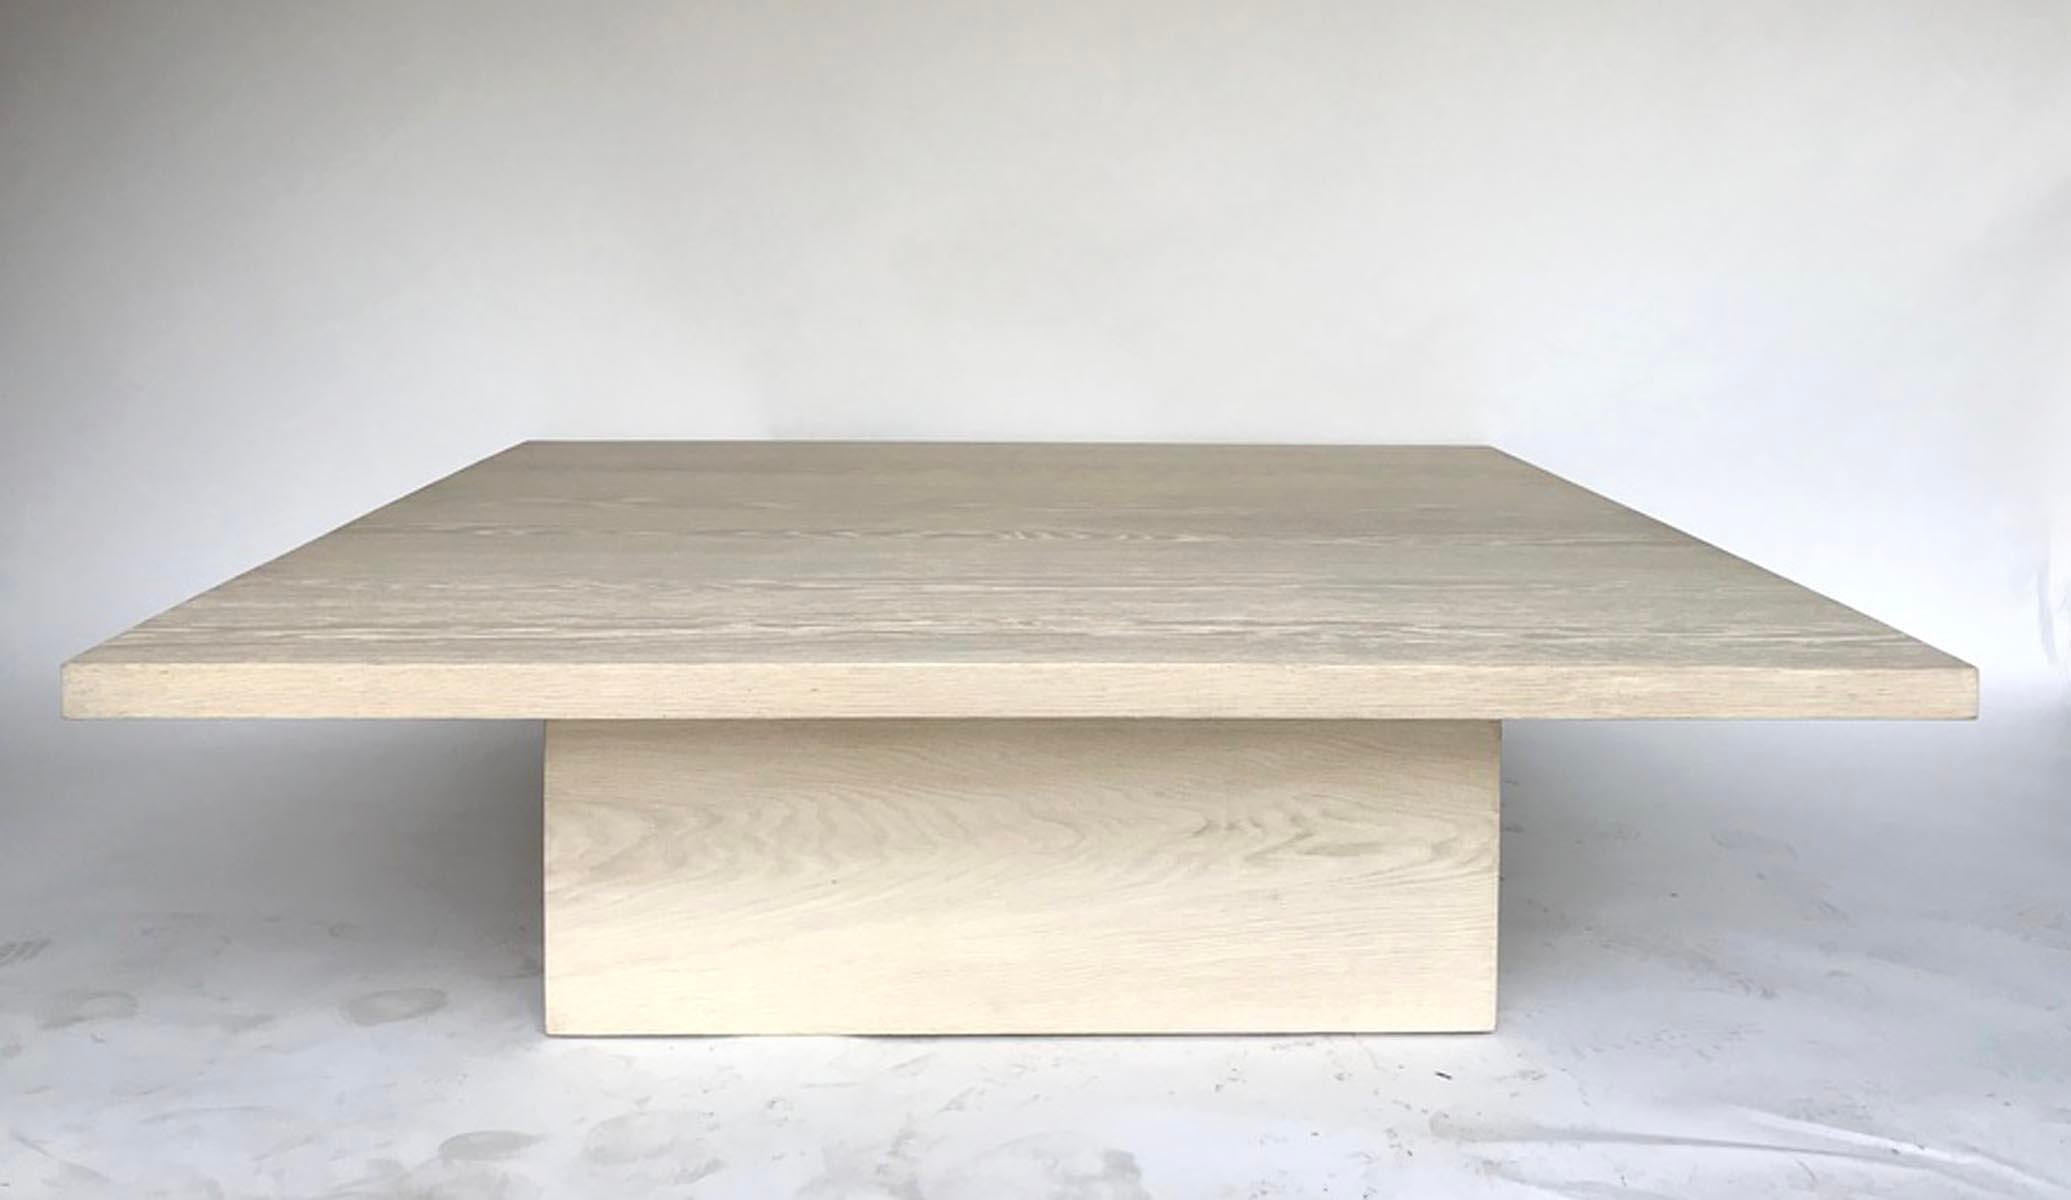 Solid white oak coffee table with mitered cube base. This 60 by 60 inch coffee table is available off the floor but can also be made in custom sizes. Finished in a light color oak. Lead time 12-14 weeks.
Made in Los Angeles by Dos Gallos Studio. DUE